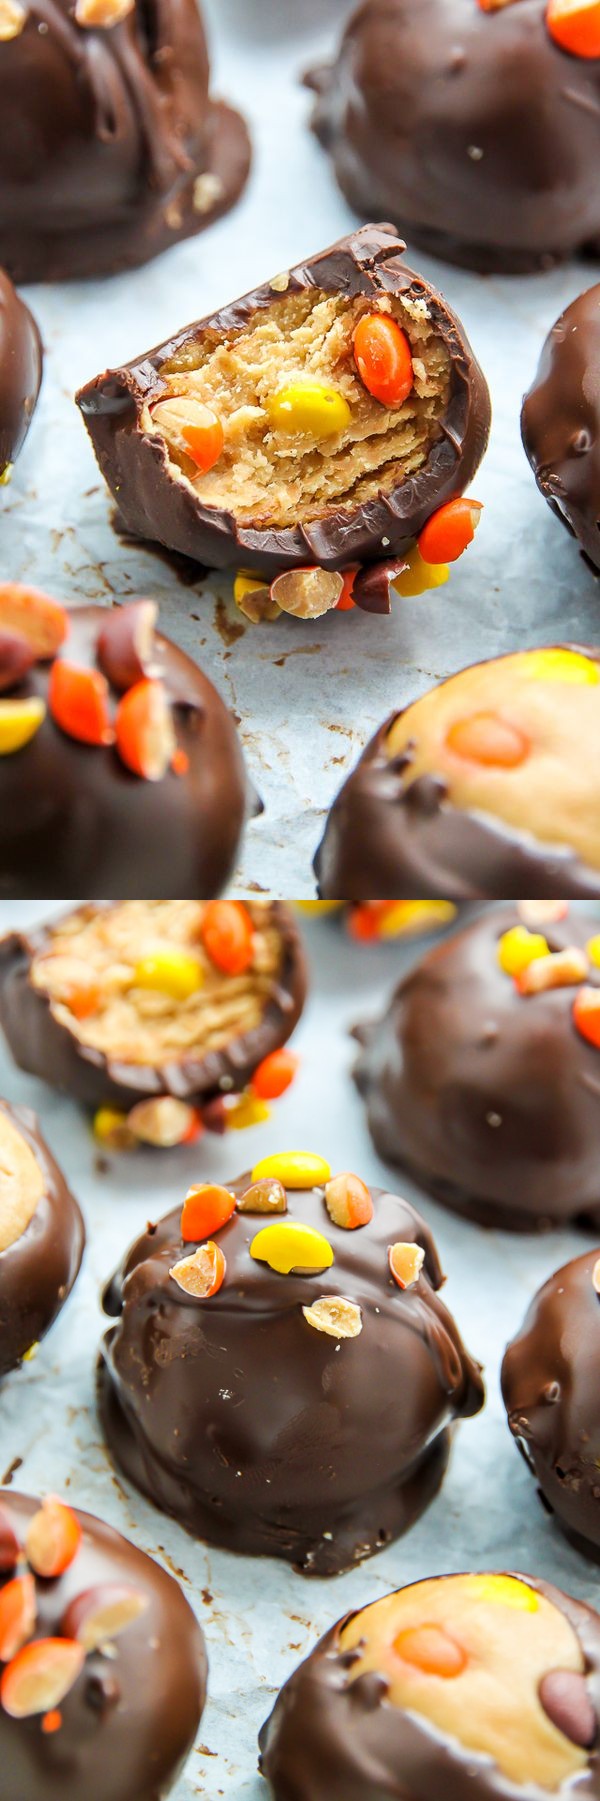 Reese’s Pieces Peanut Butter Truffles